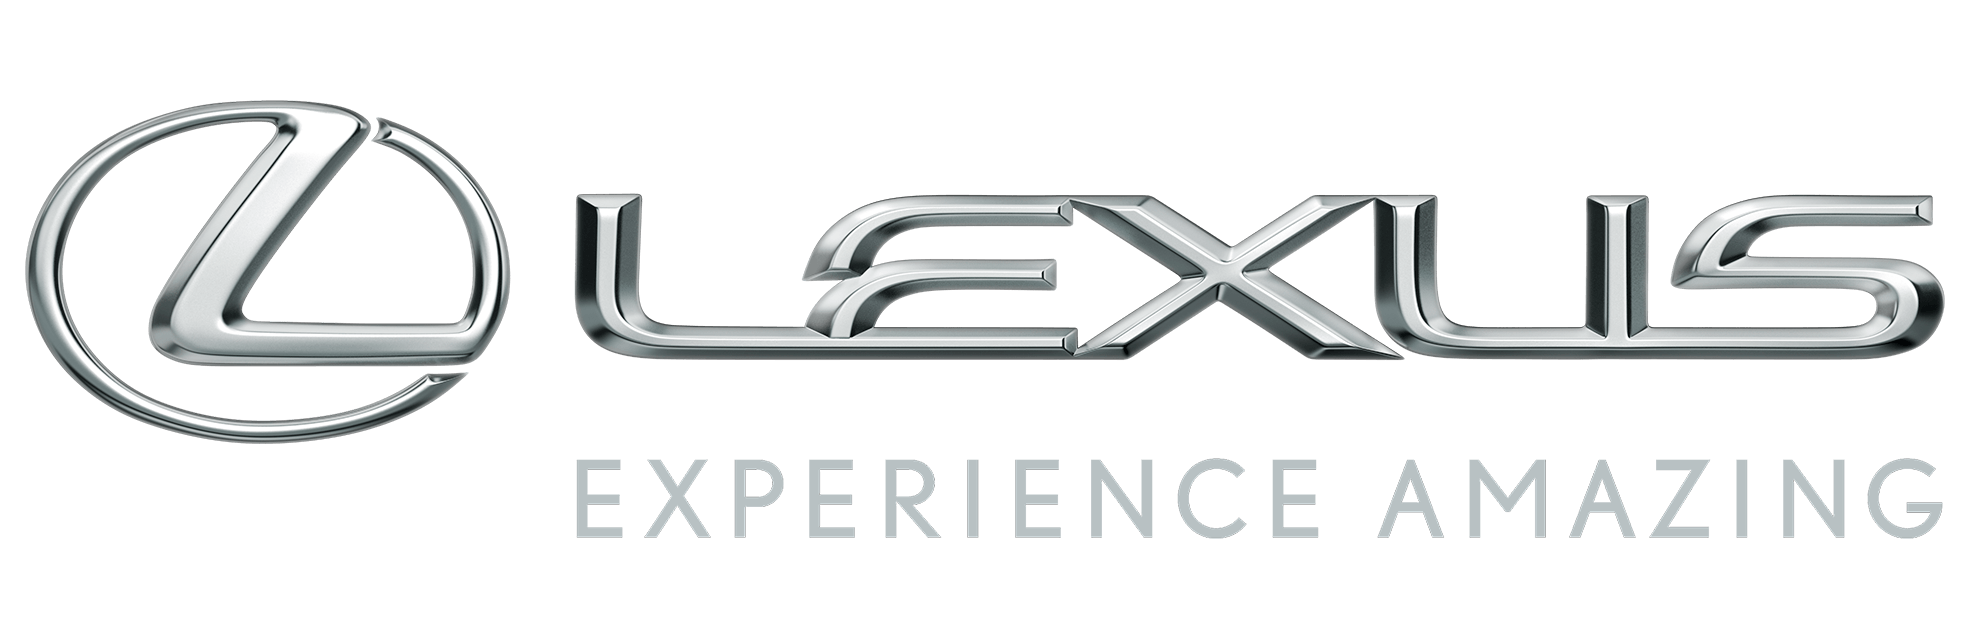 Lexus sponsors the 2019 edition of the Fine Wines & Food Fair.